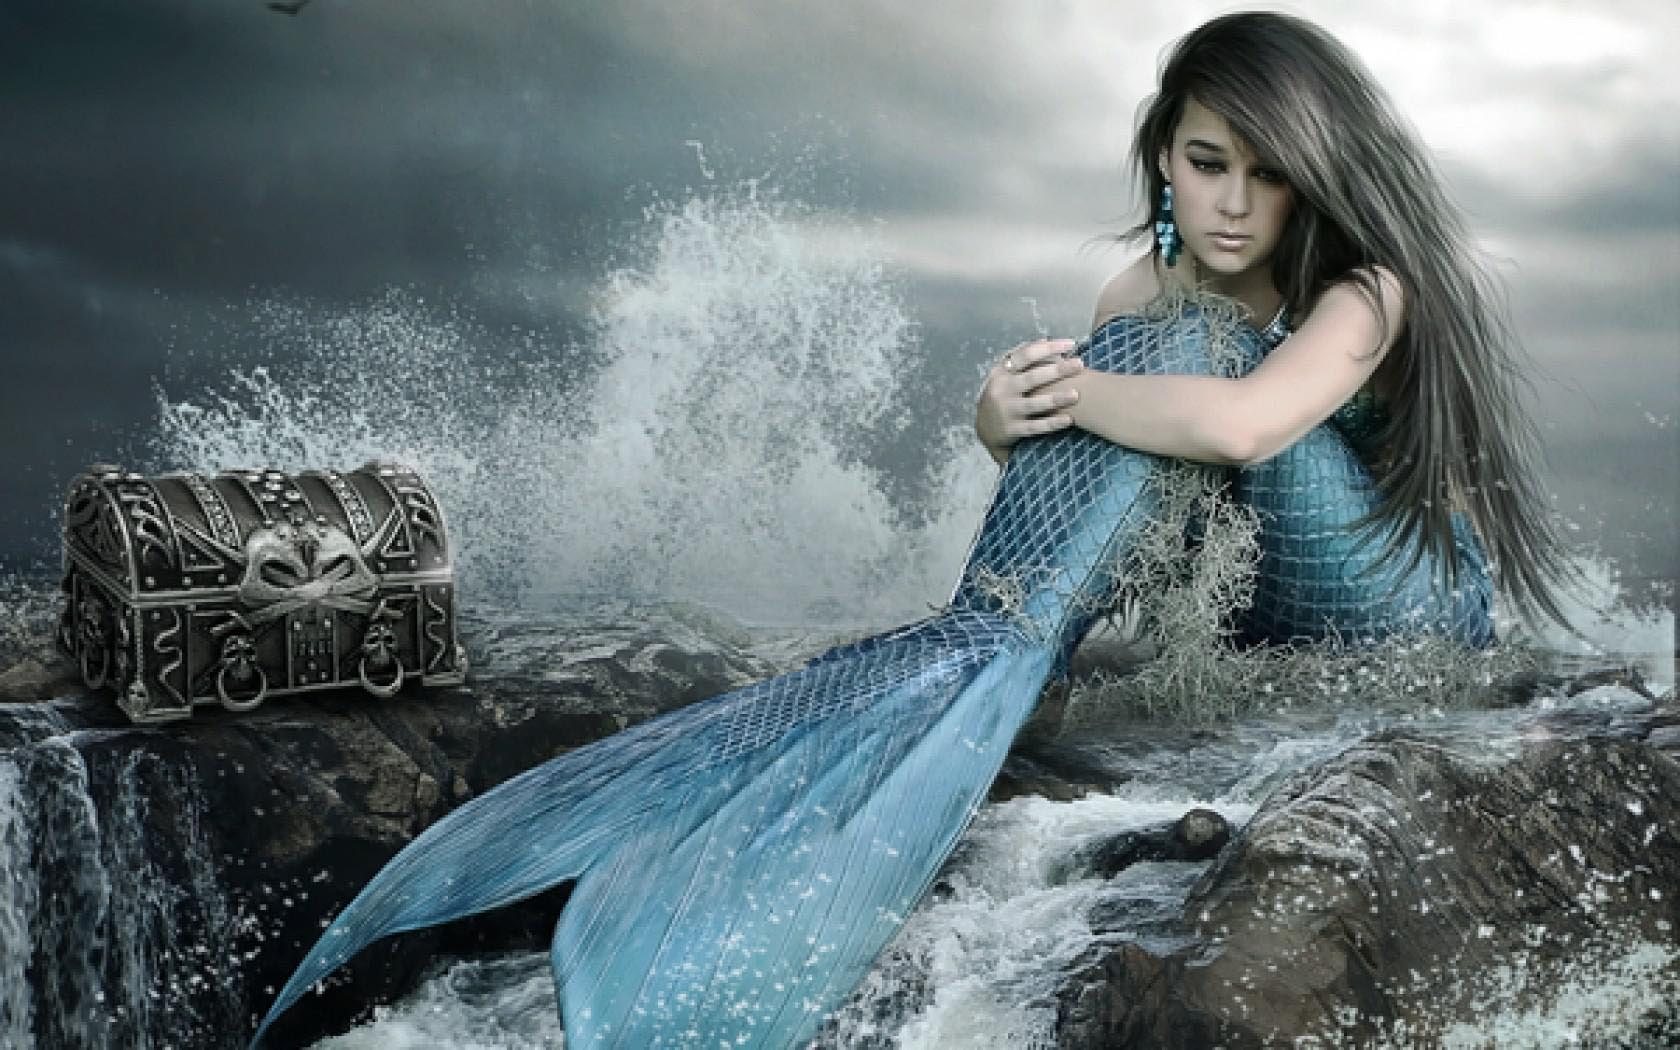 Latest Mermaid HD New Wallpapers Free Download | New HD Wallpapers ...